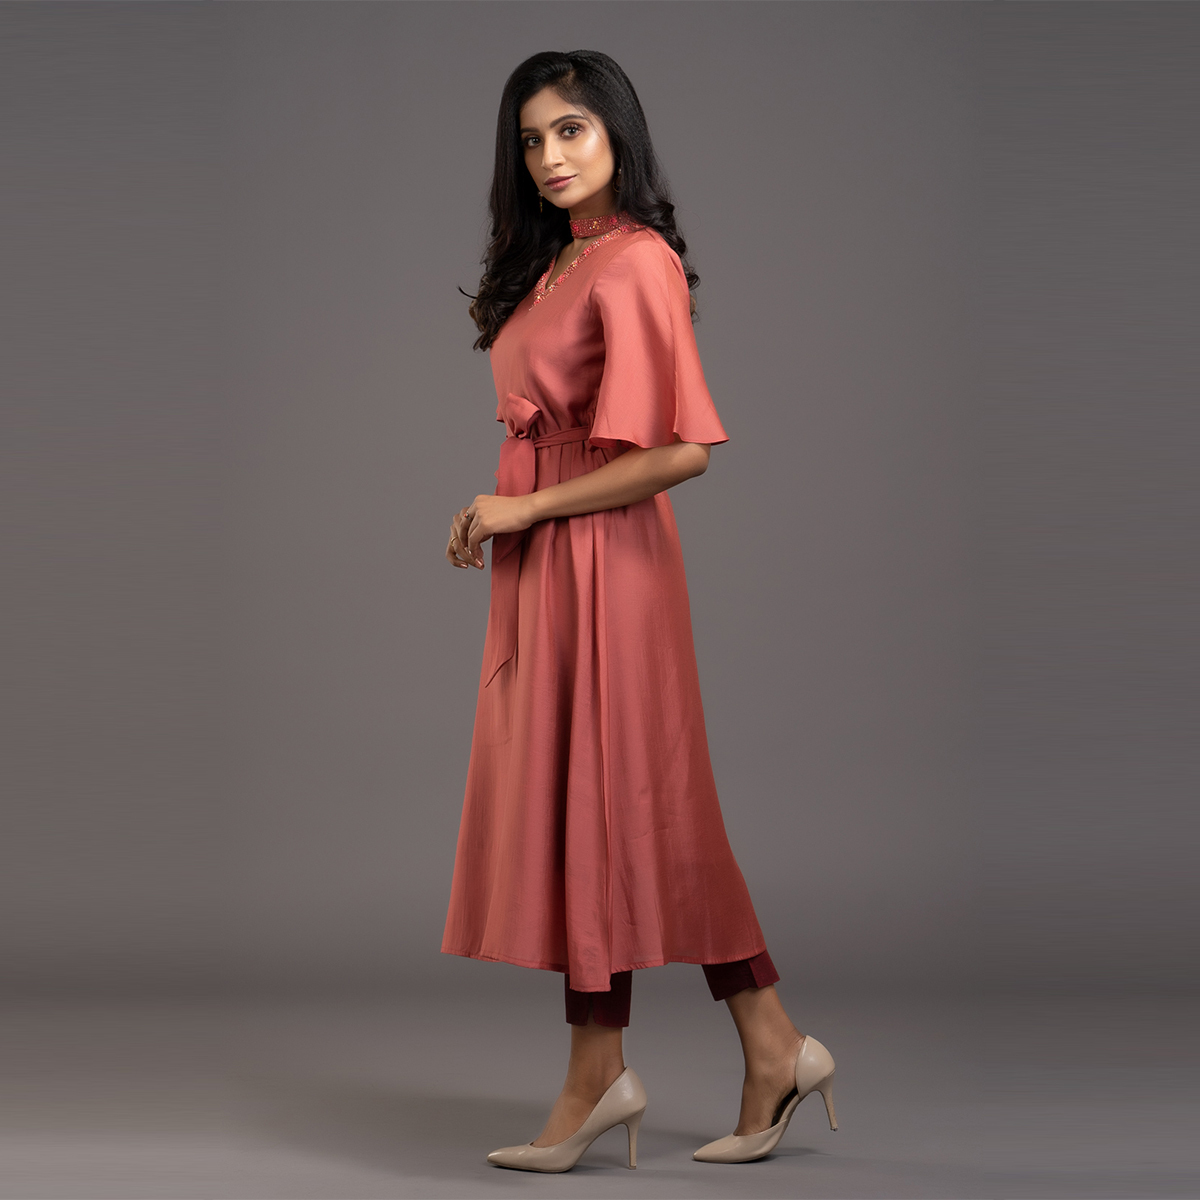 Zella Bell Sleeve Flare Dress Styled With Embellished Chocker Neck & Waist Tie-Up - Onion Pink